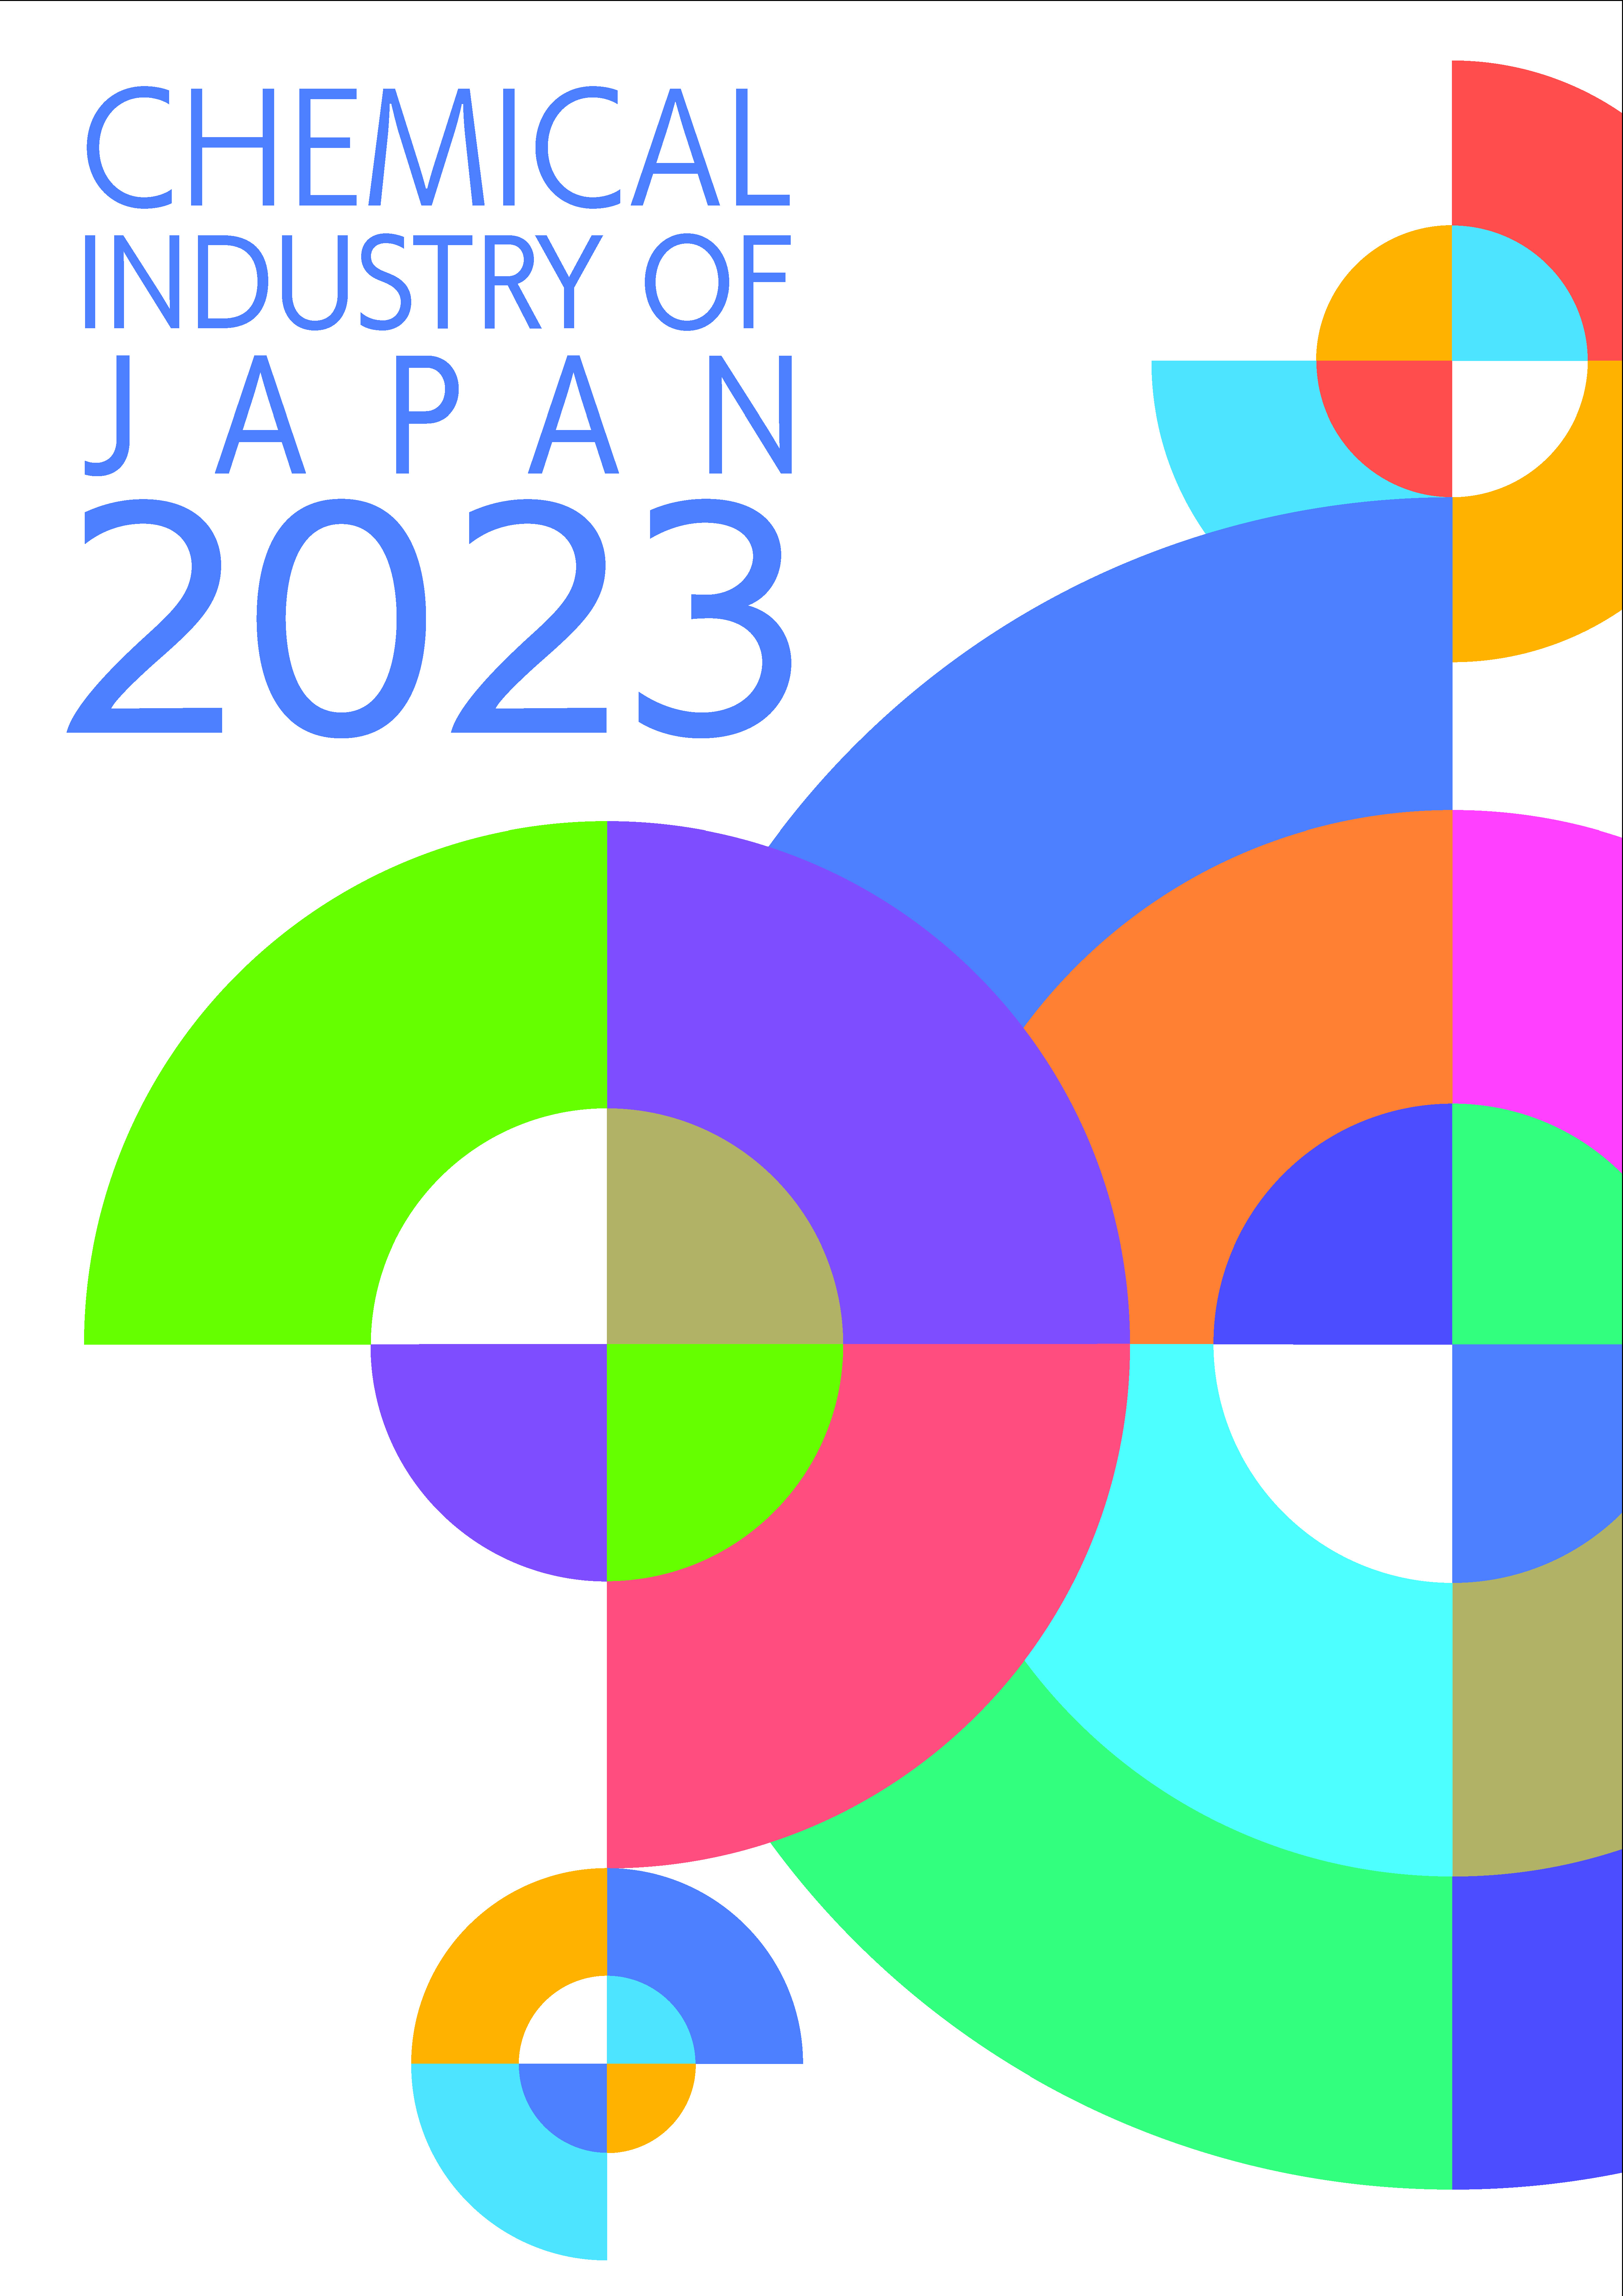 2023 CHEMICAL INDUSTRY OF JAPAN IN GRAPHS